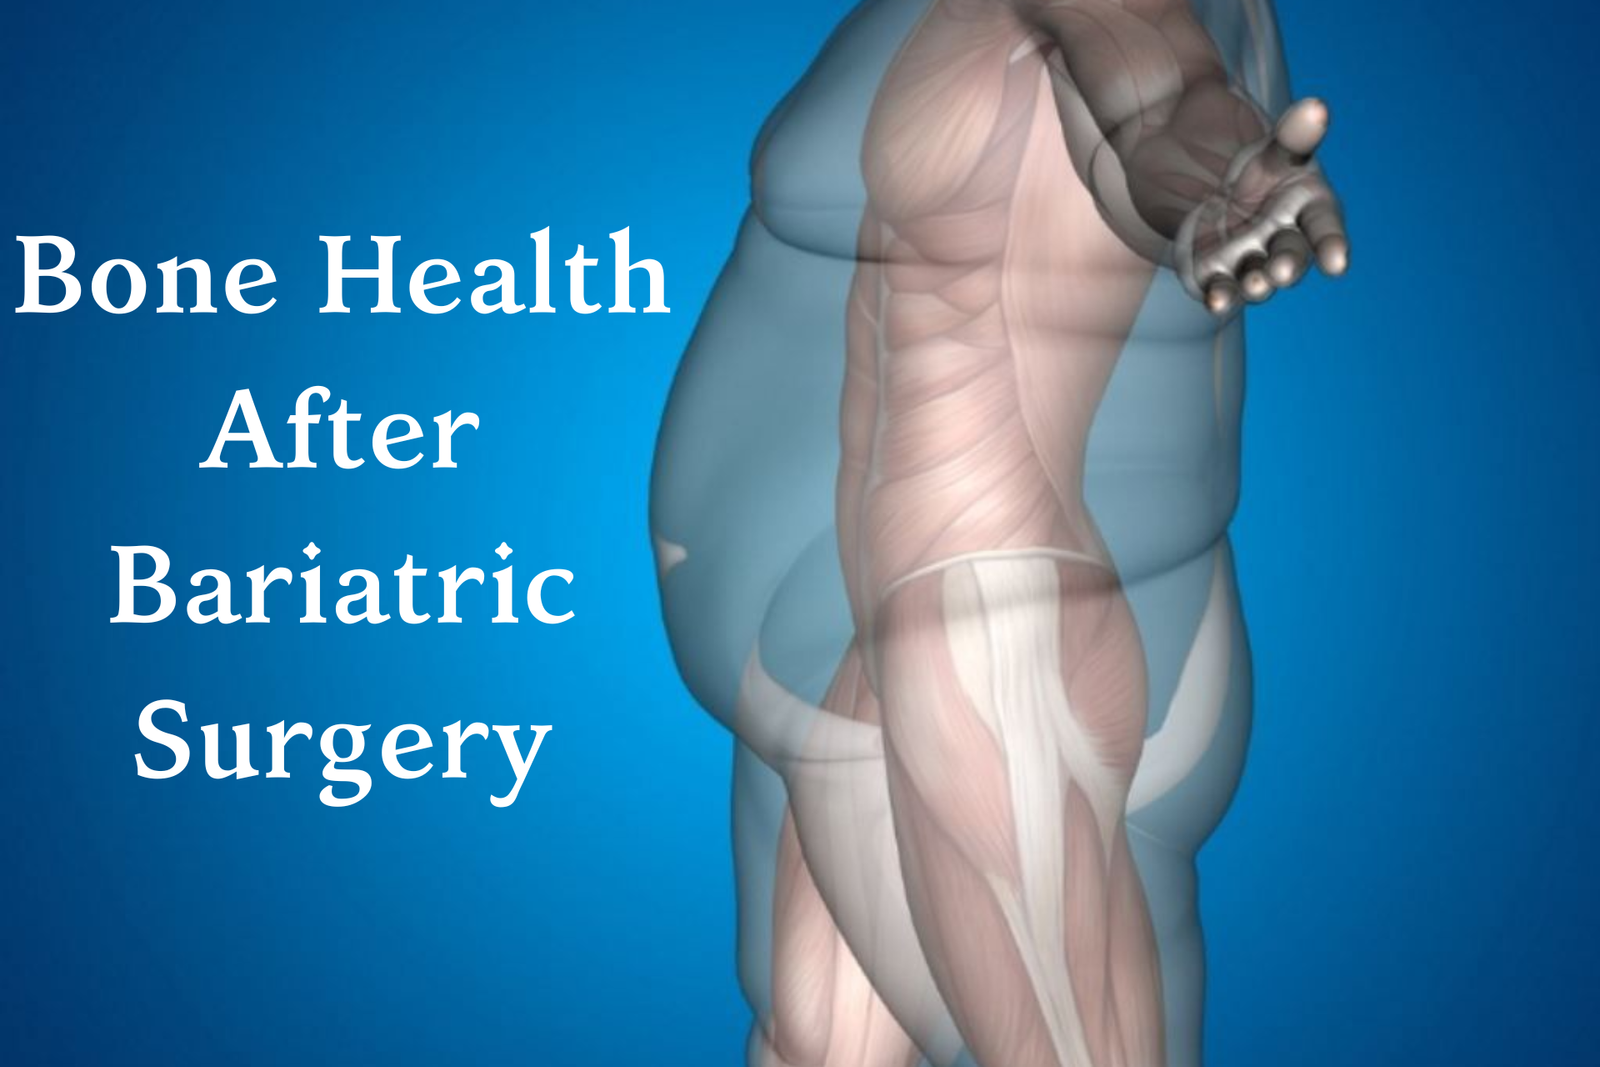 Bone Health after bariatric surgery